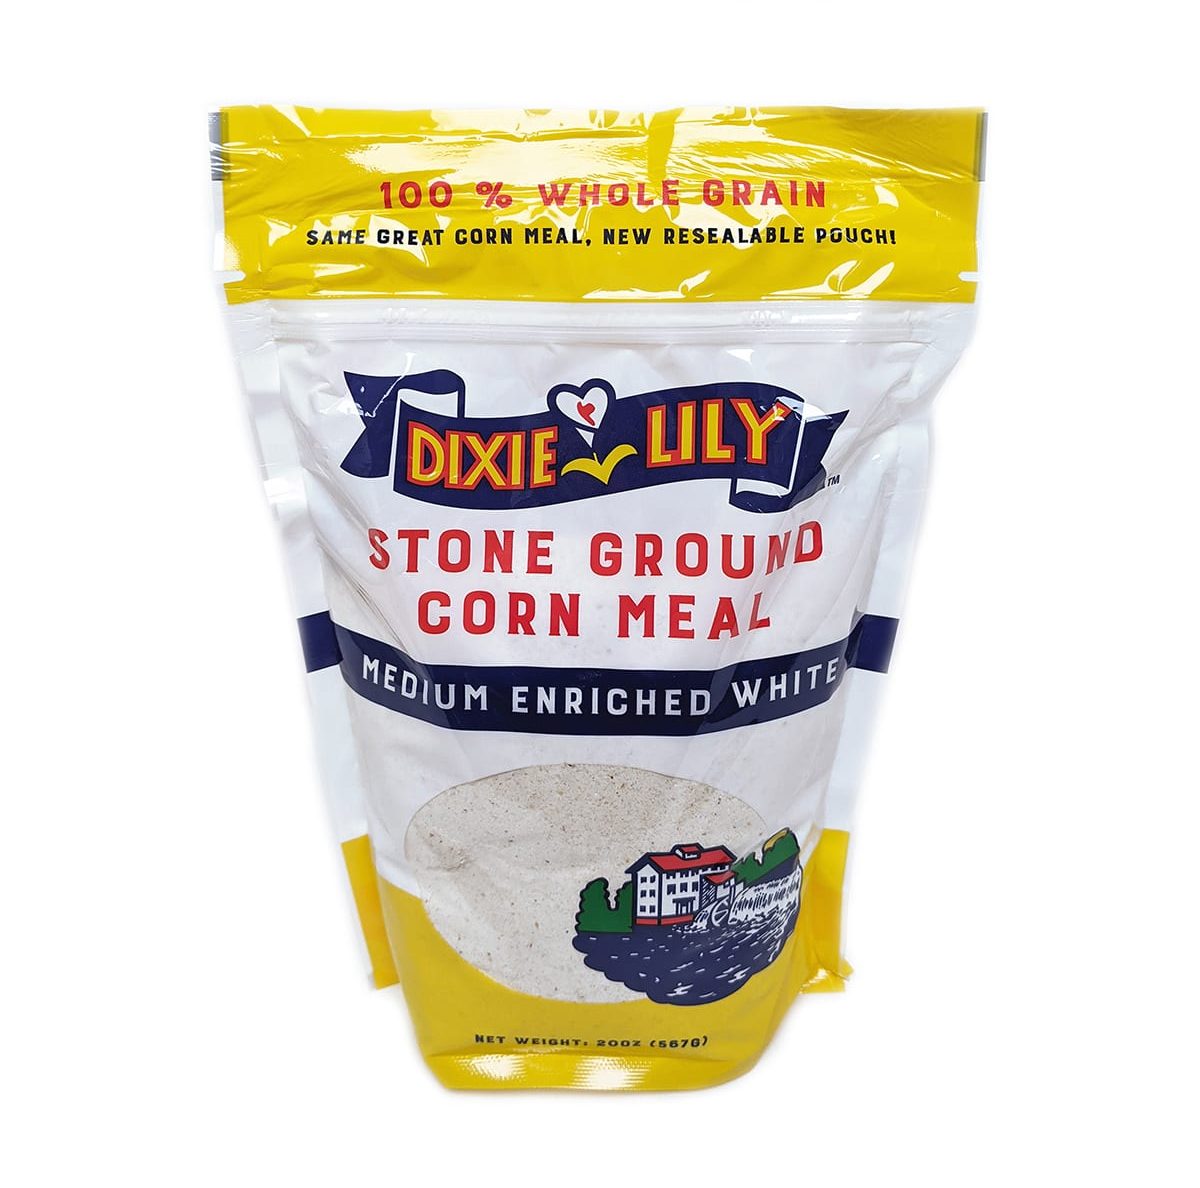 Dixie Lily Stone Ground Corn Meal Med Enriched White 20oz